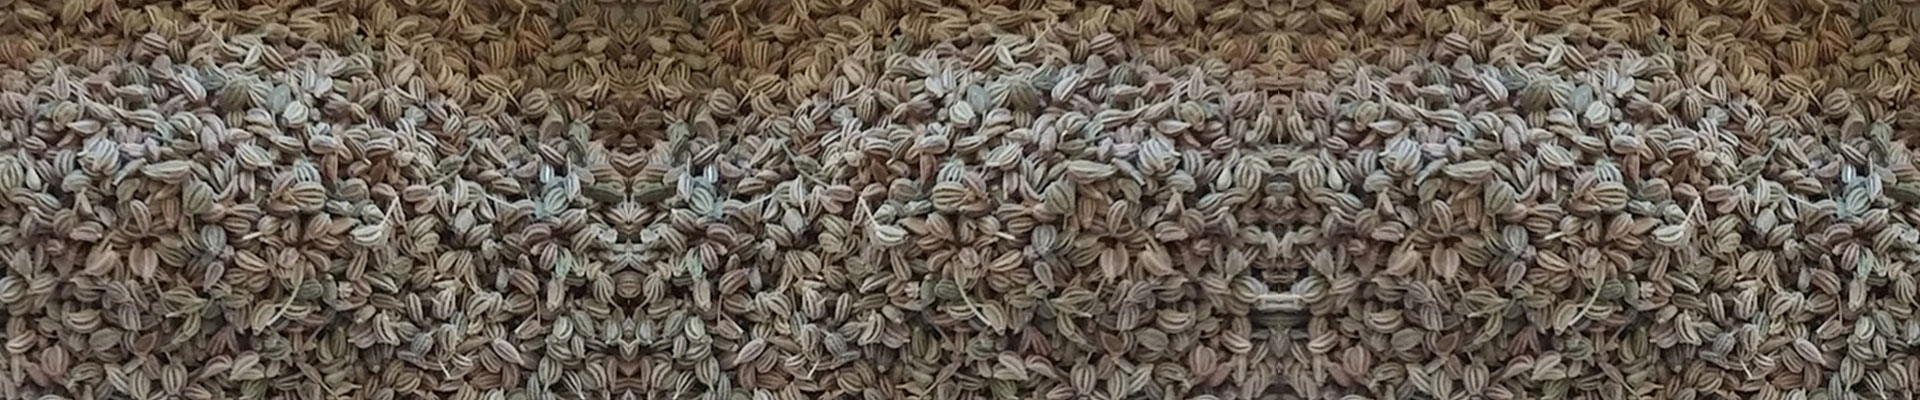 CAROM SEEDS-THE NUTRITIOUS SPICE